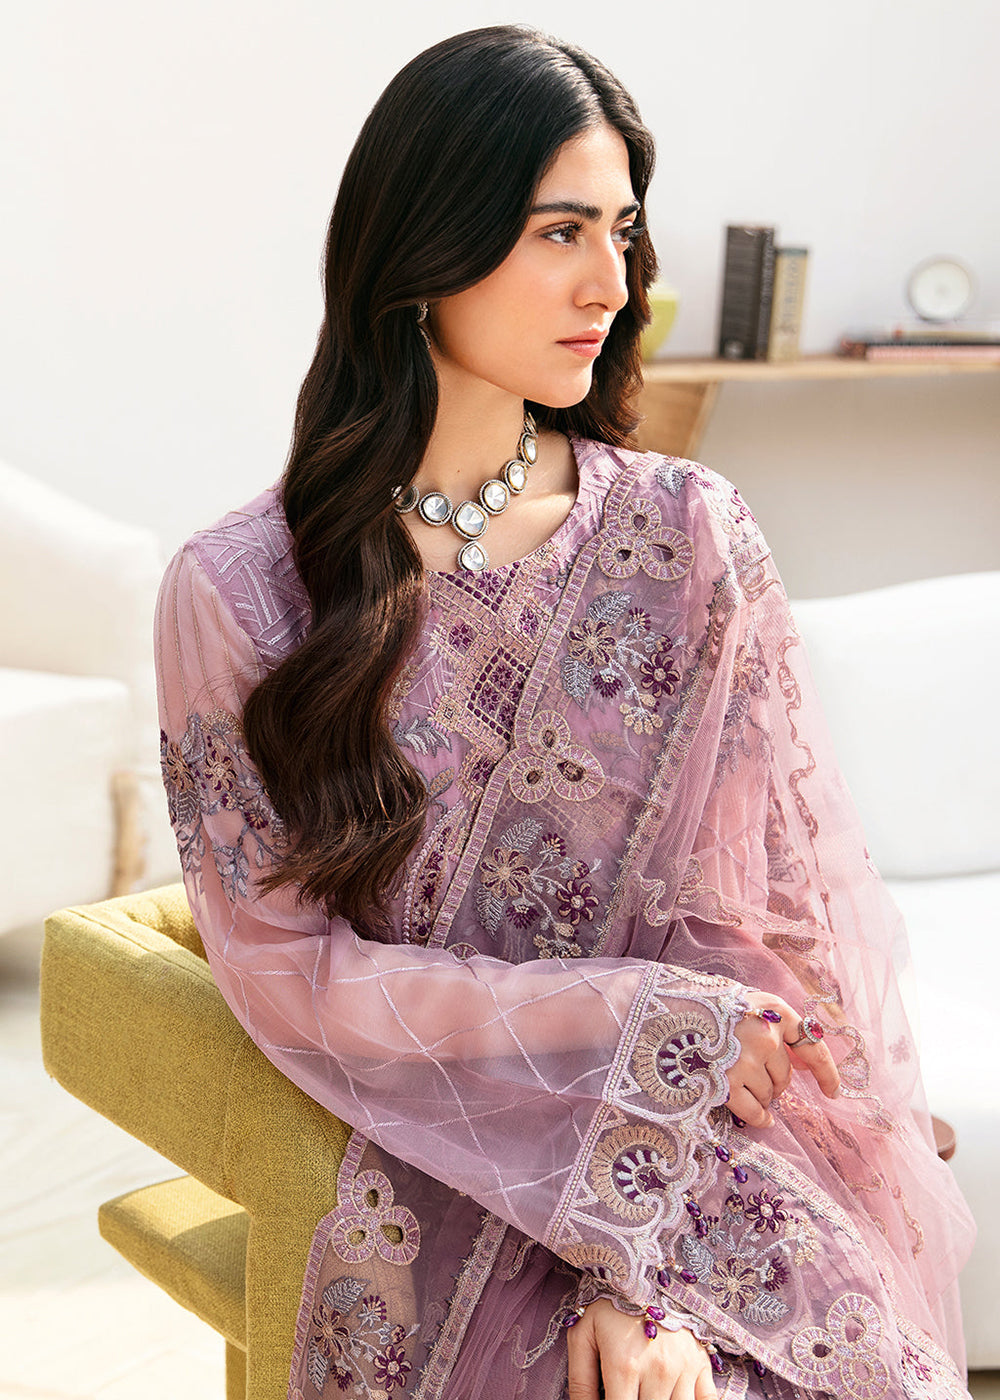 Buy Now Chevron Chiffon Collection Volume 8 by Ramsha | A-801 Online at Empress in USA, UK, Canada & Worldwide at Empress Clothing.